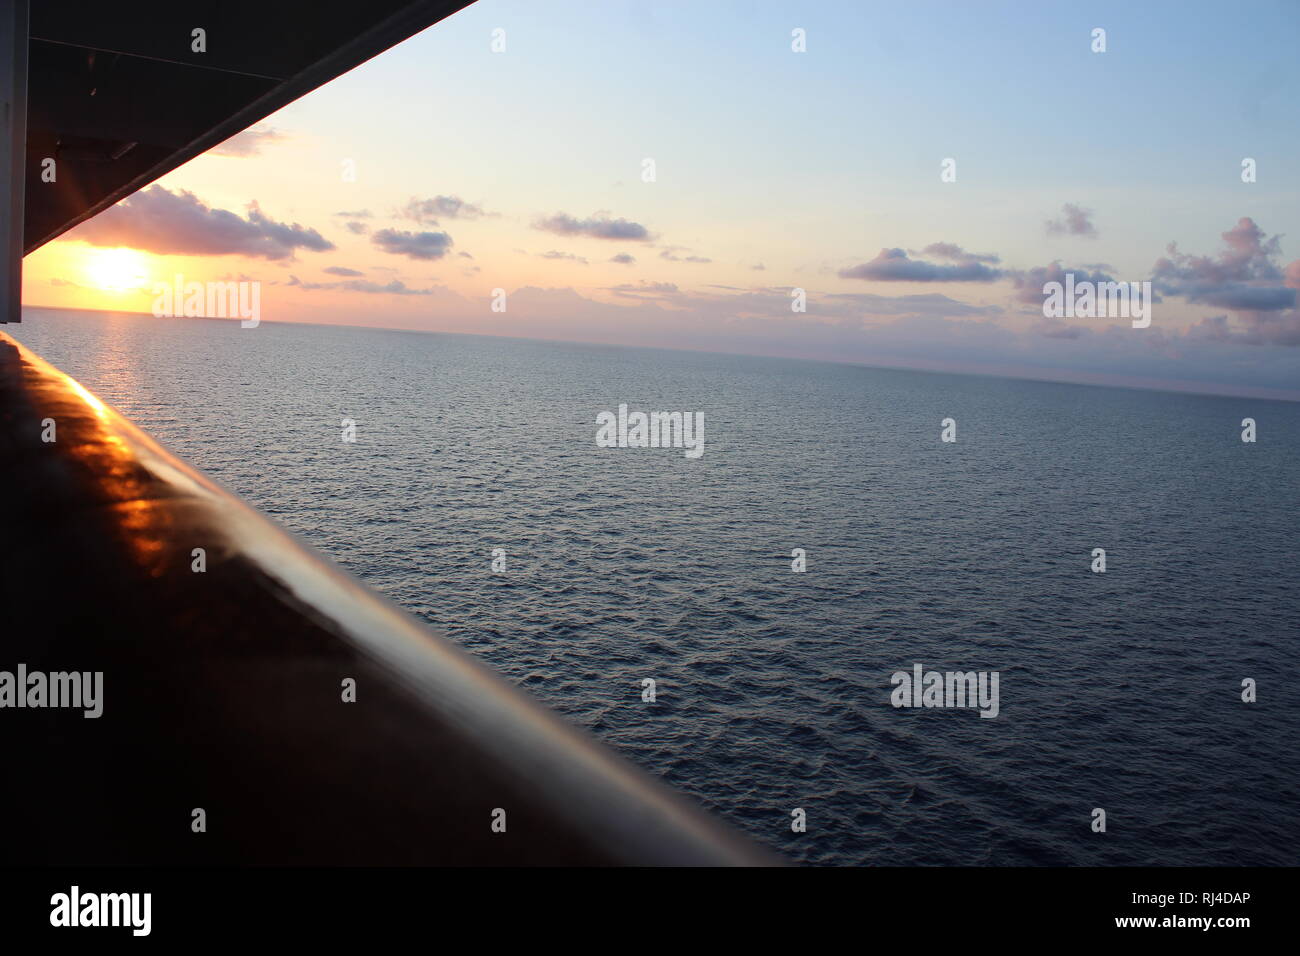 Beautiful sunset upon the Atlantic Ocean seen from a cruise ship. Stock Photo